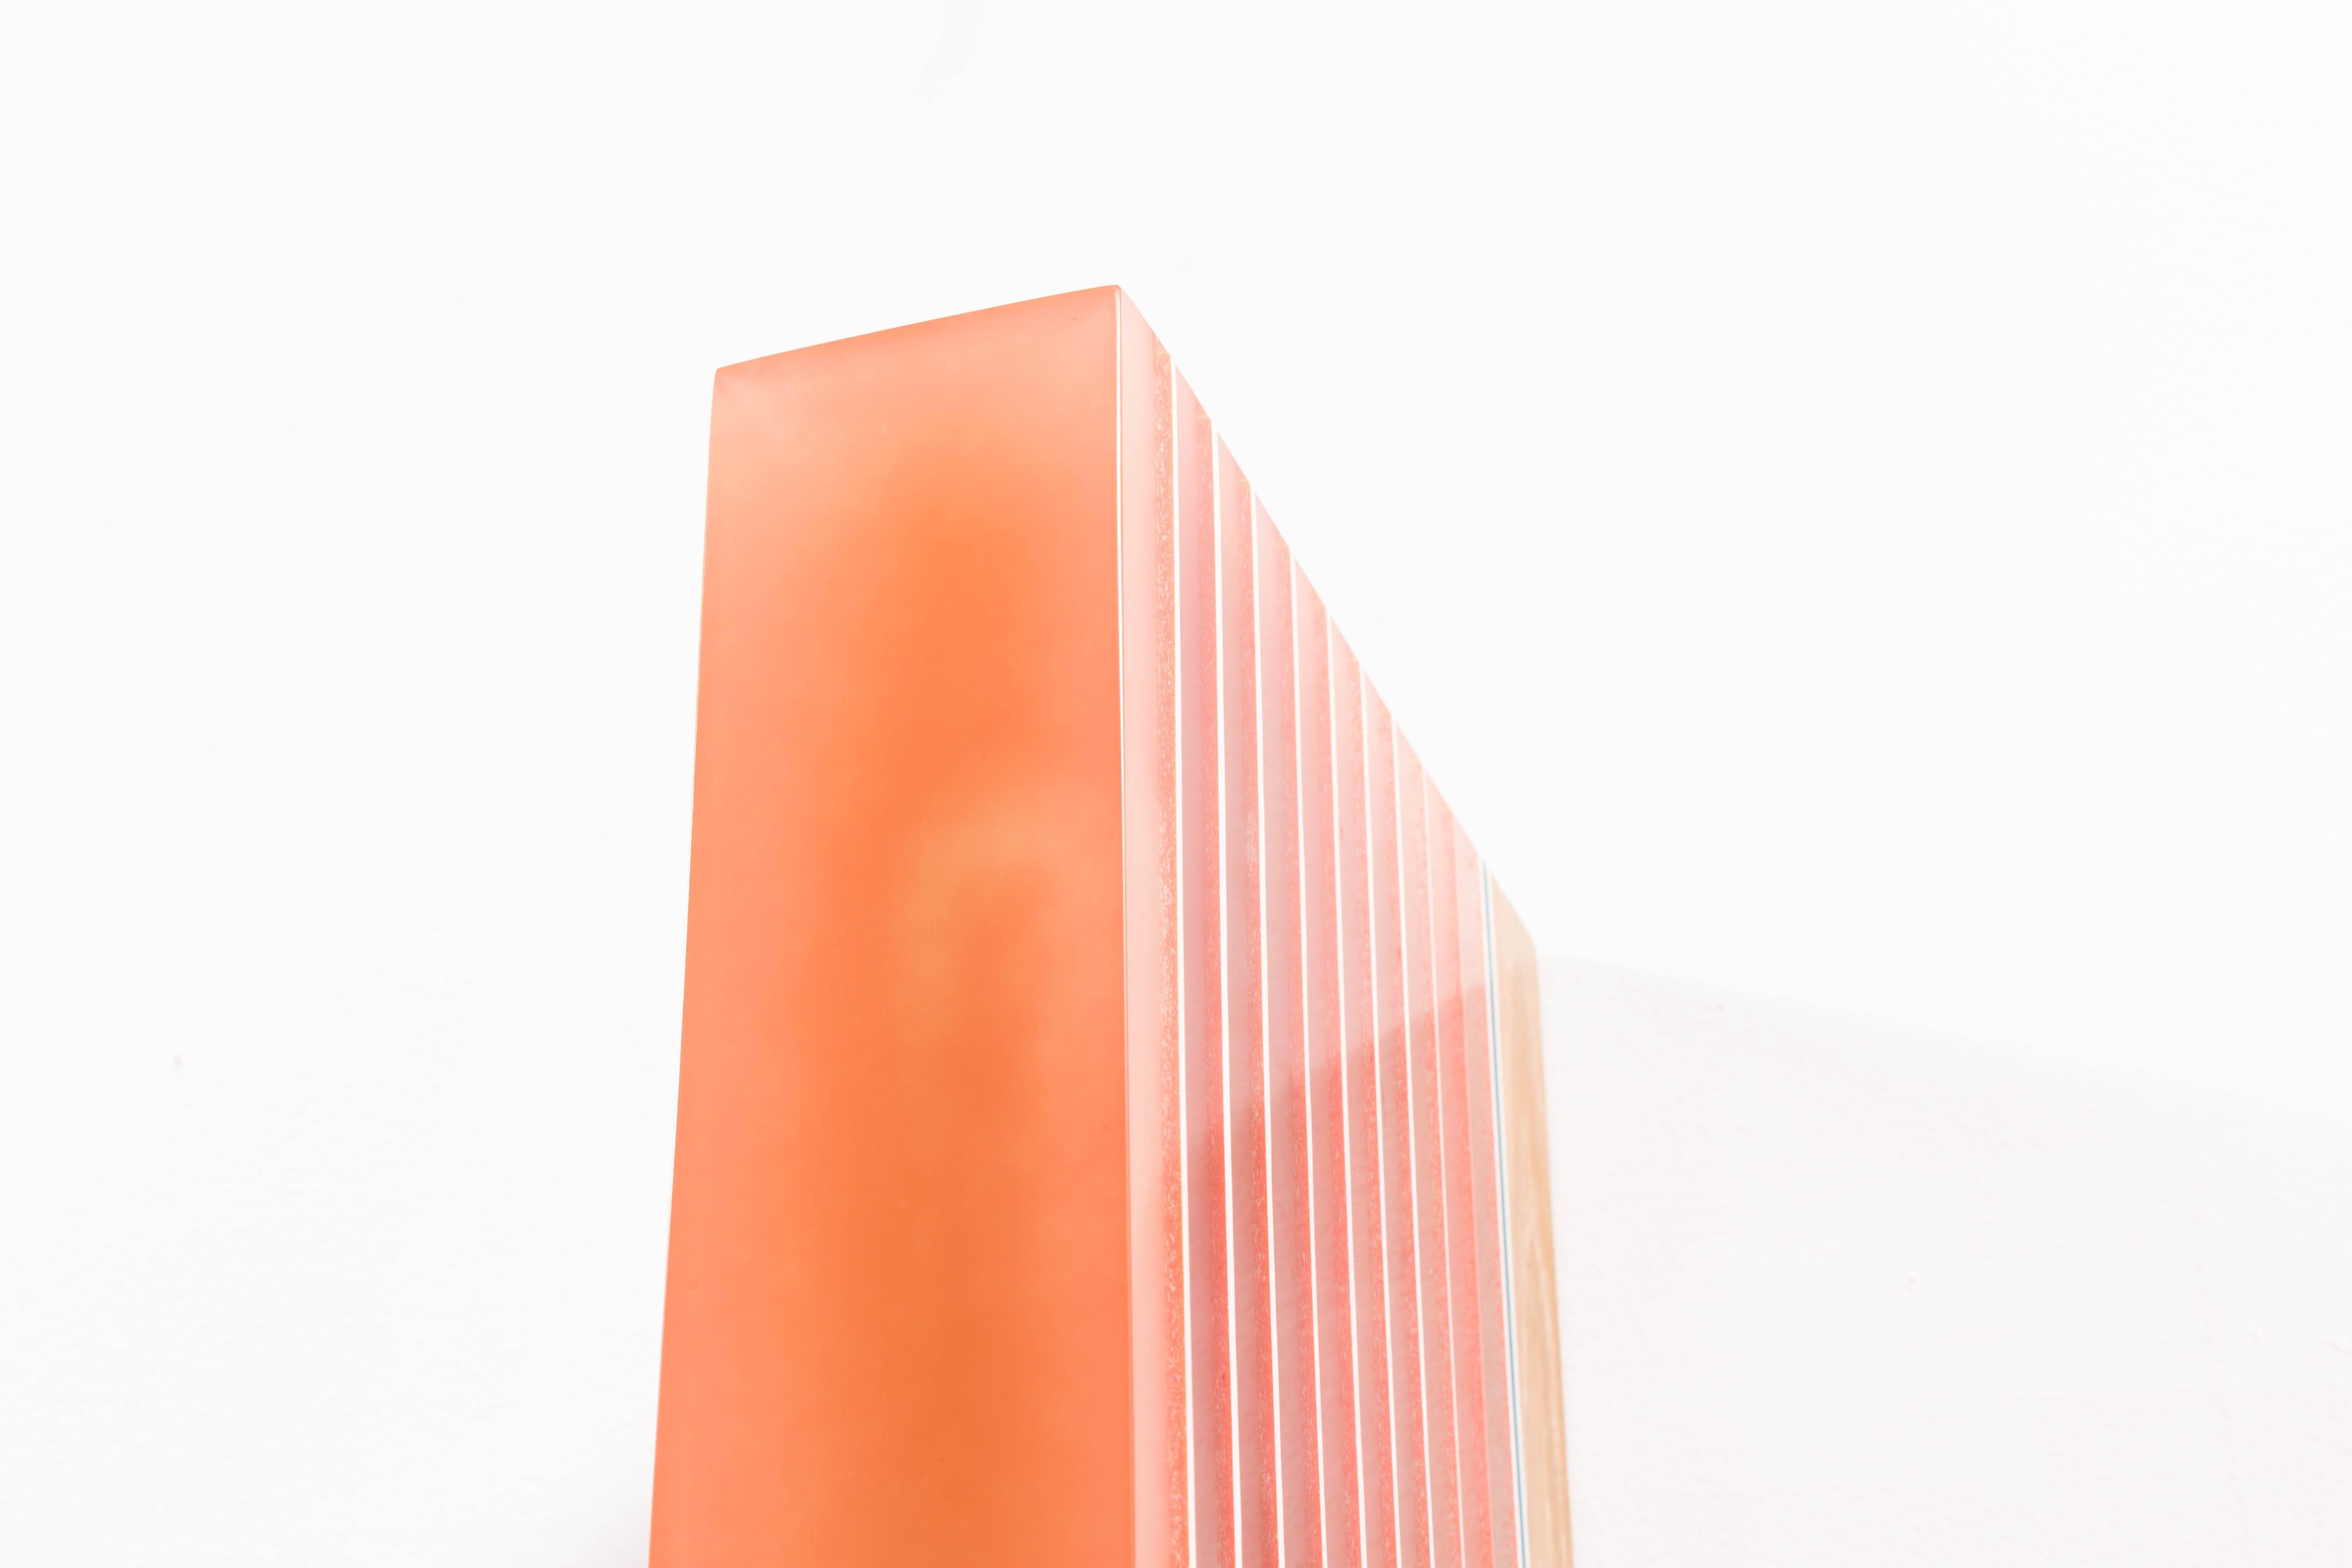 Beige, pale orange, camel, light salmon, salmon and white.
In a technique evolved over years of experimentation, Schmitz-Schmelzer pours resin in parallel or vertical layers onto a plywood-capped base of raw tropical wood. Marriage of the